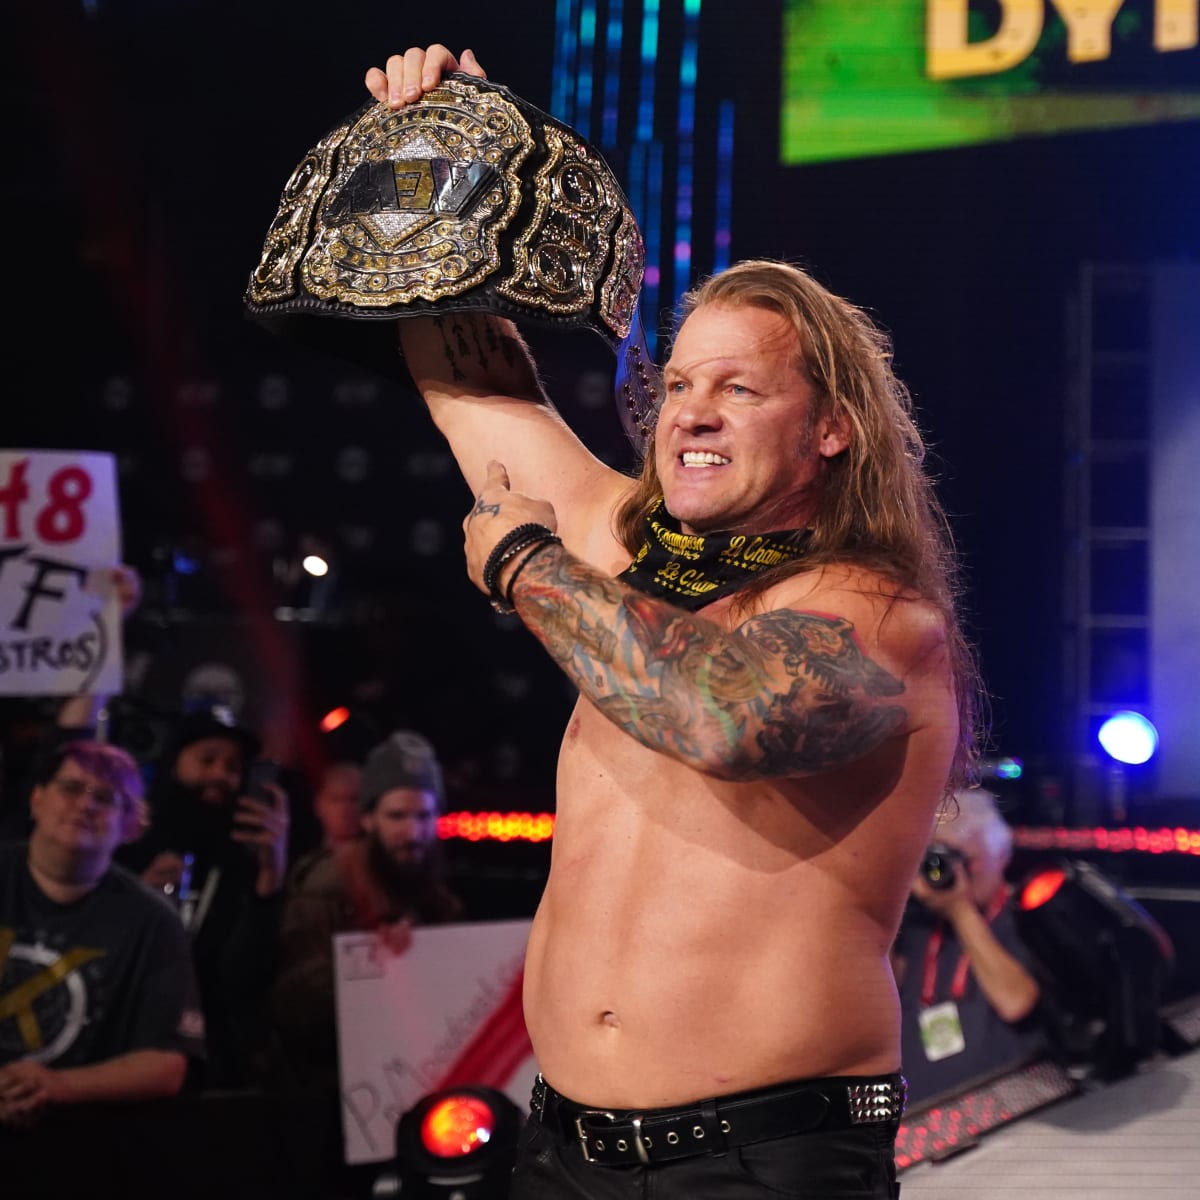 Chris Jericho is still one of the best even at his age. 